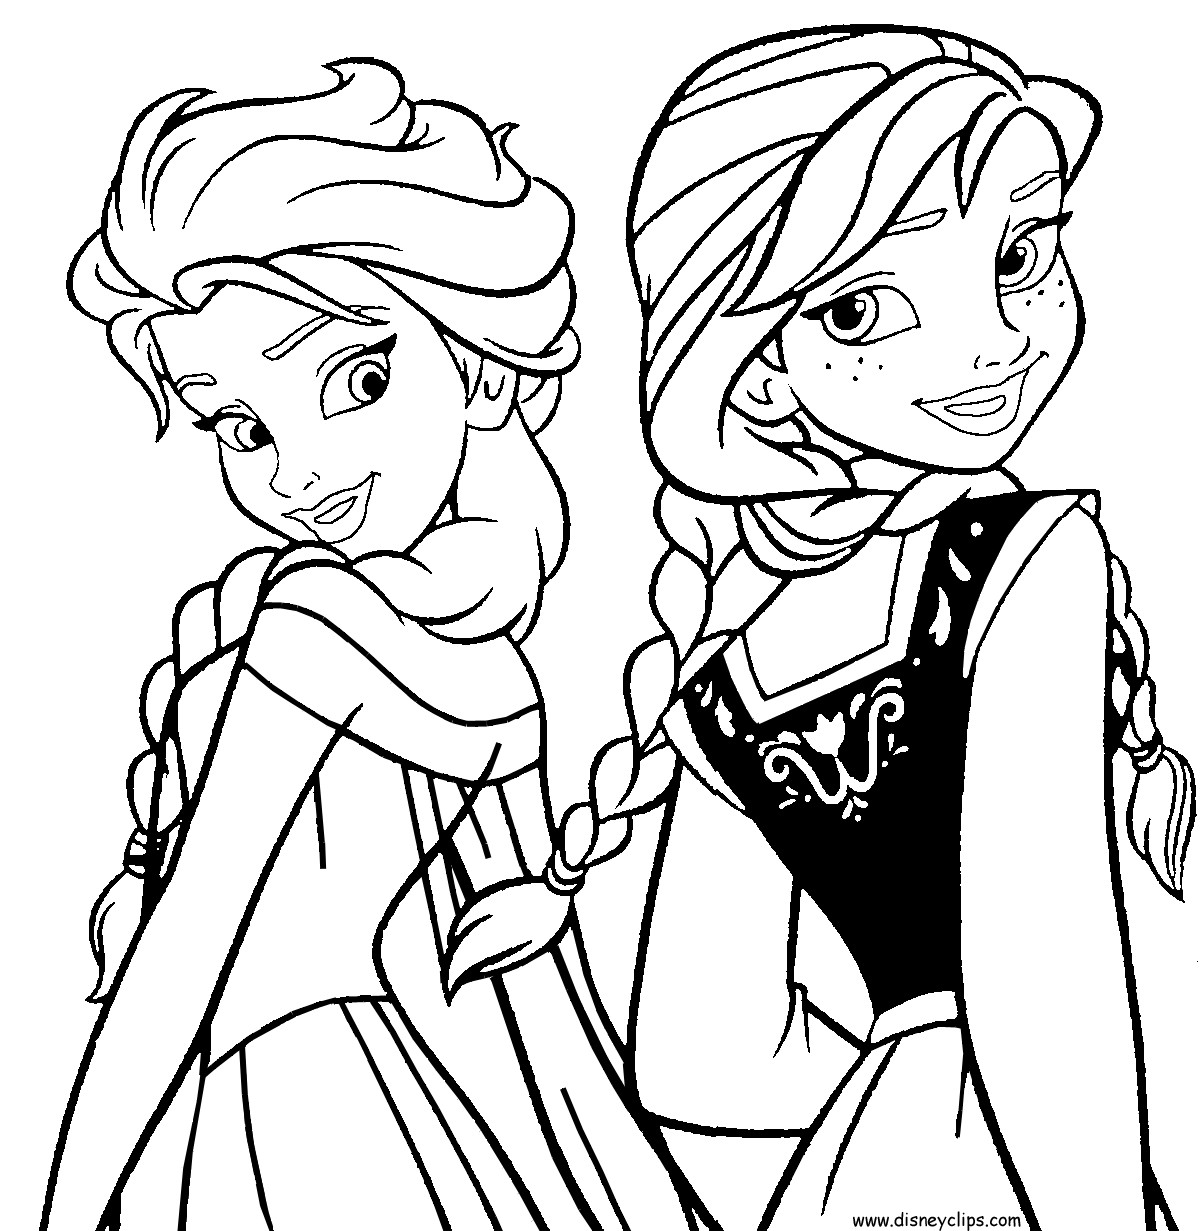 Frozen Coloring Pages For Kids
 printable frozen coloring pages